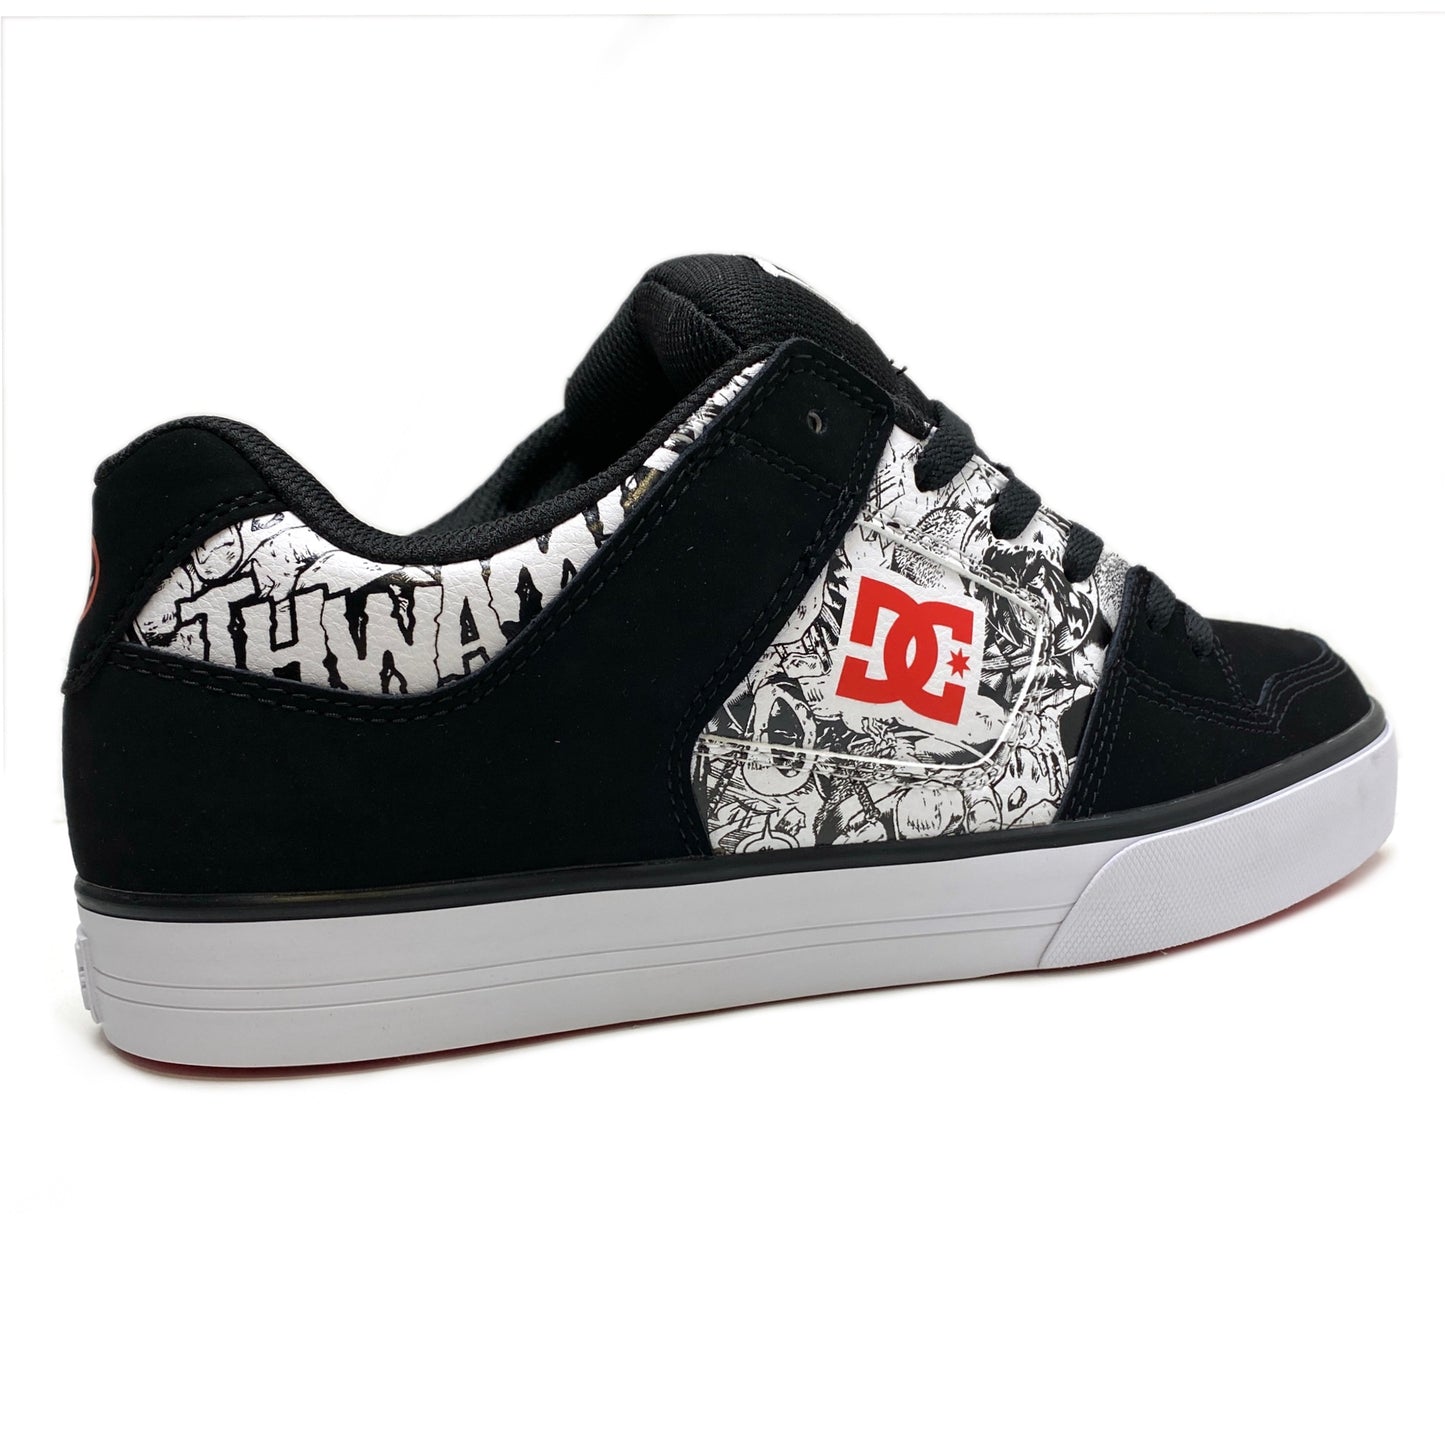 MARVEL DEADPOOL X DC SHOES PURE BLACK WHITE RED MEN'S TRAINERS